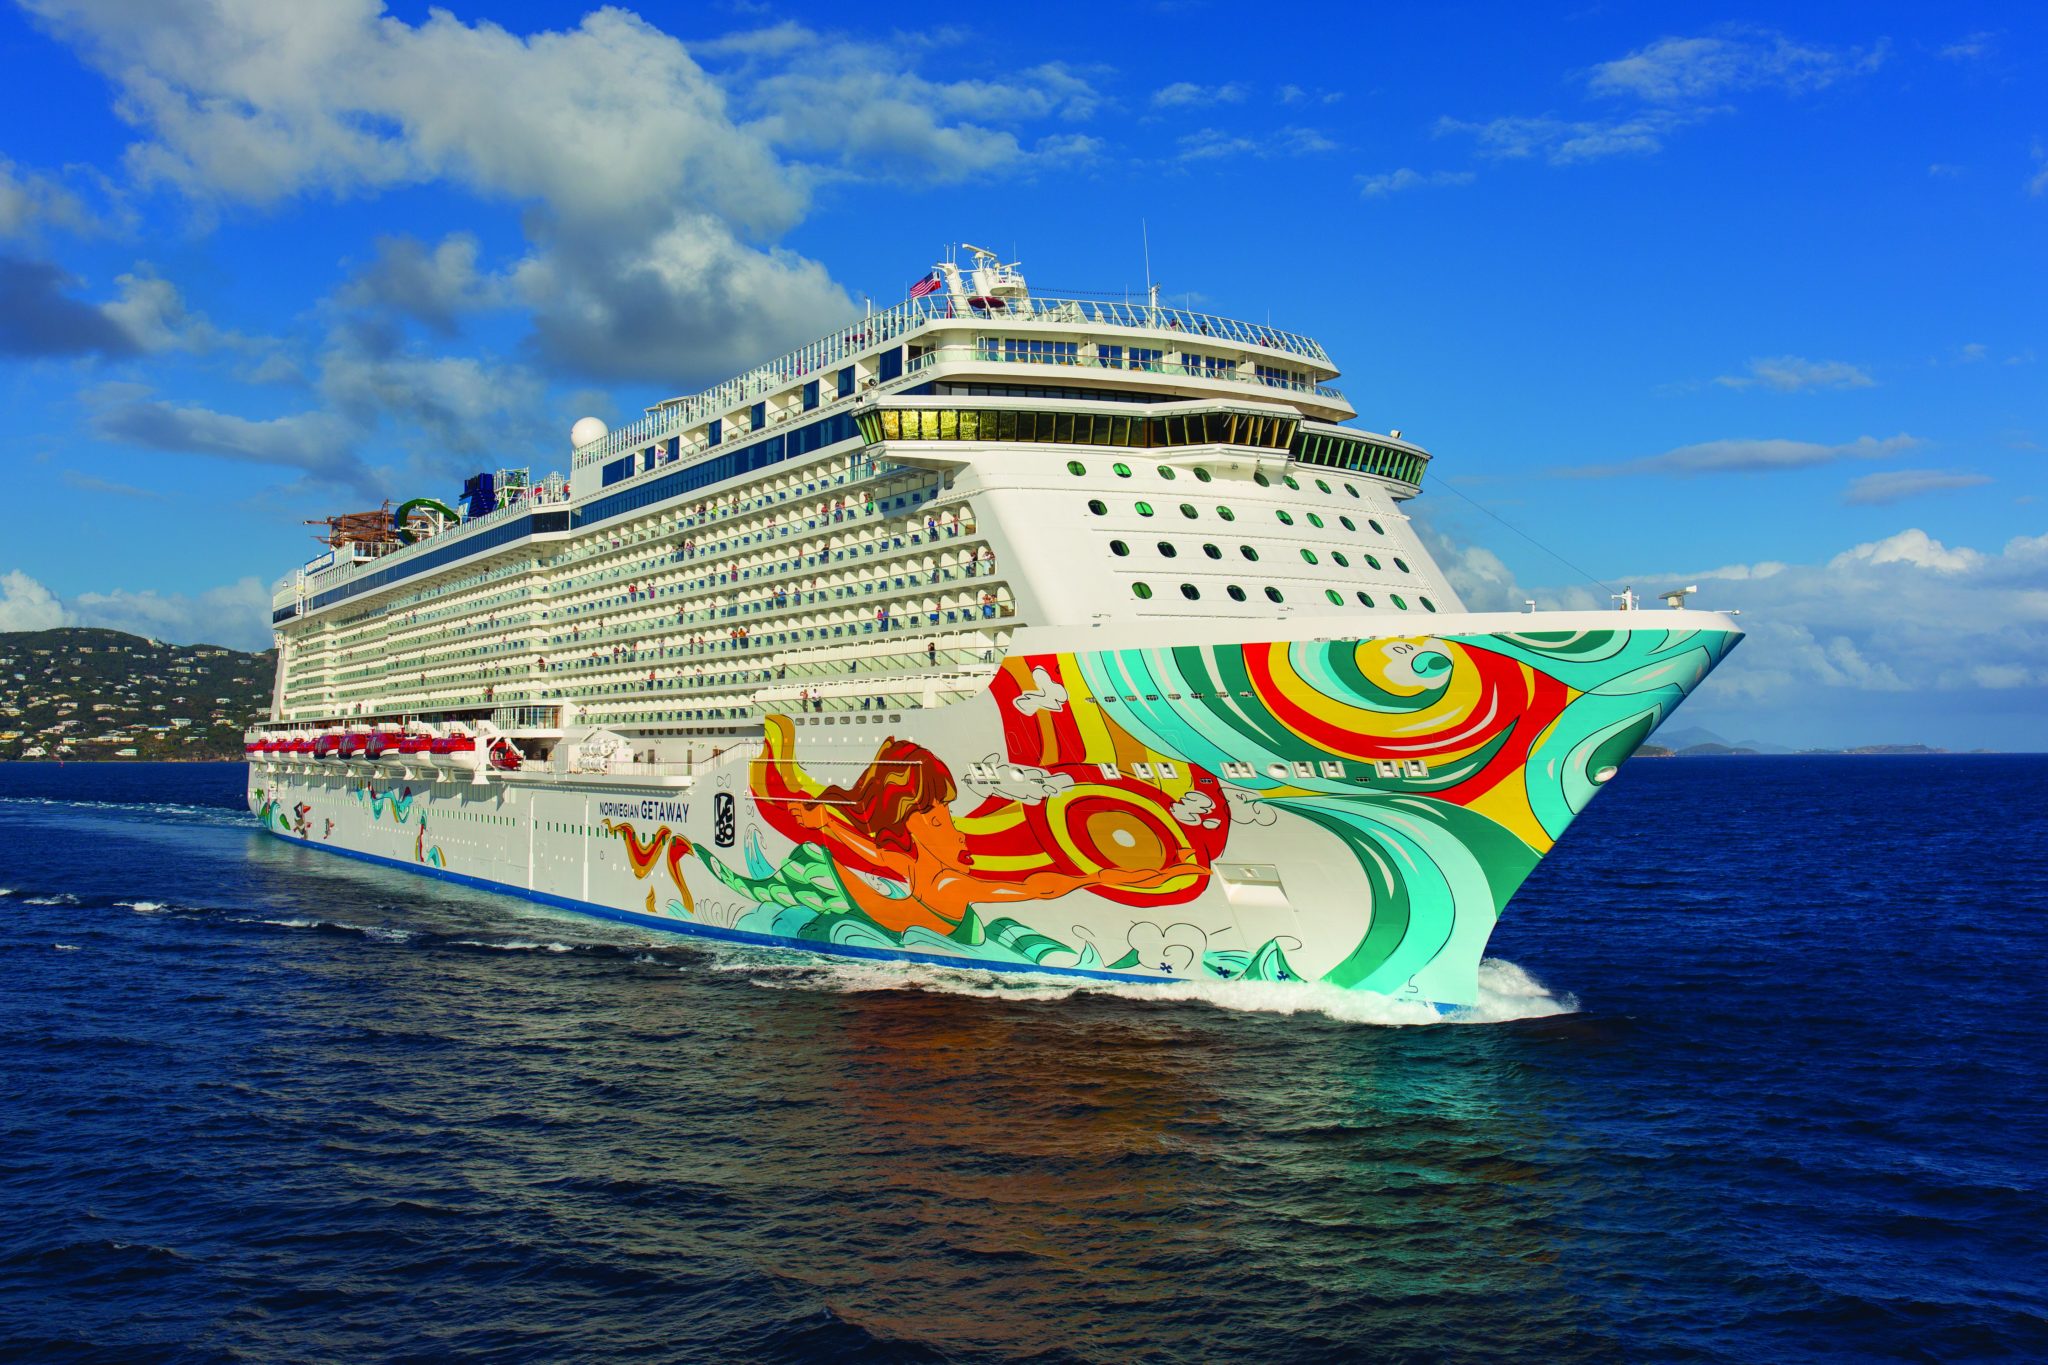 NCL’s Norwegian Jade to homeport one cruise ship in Piraeus this summer for journeys to Greek isles